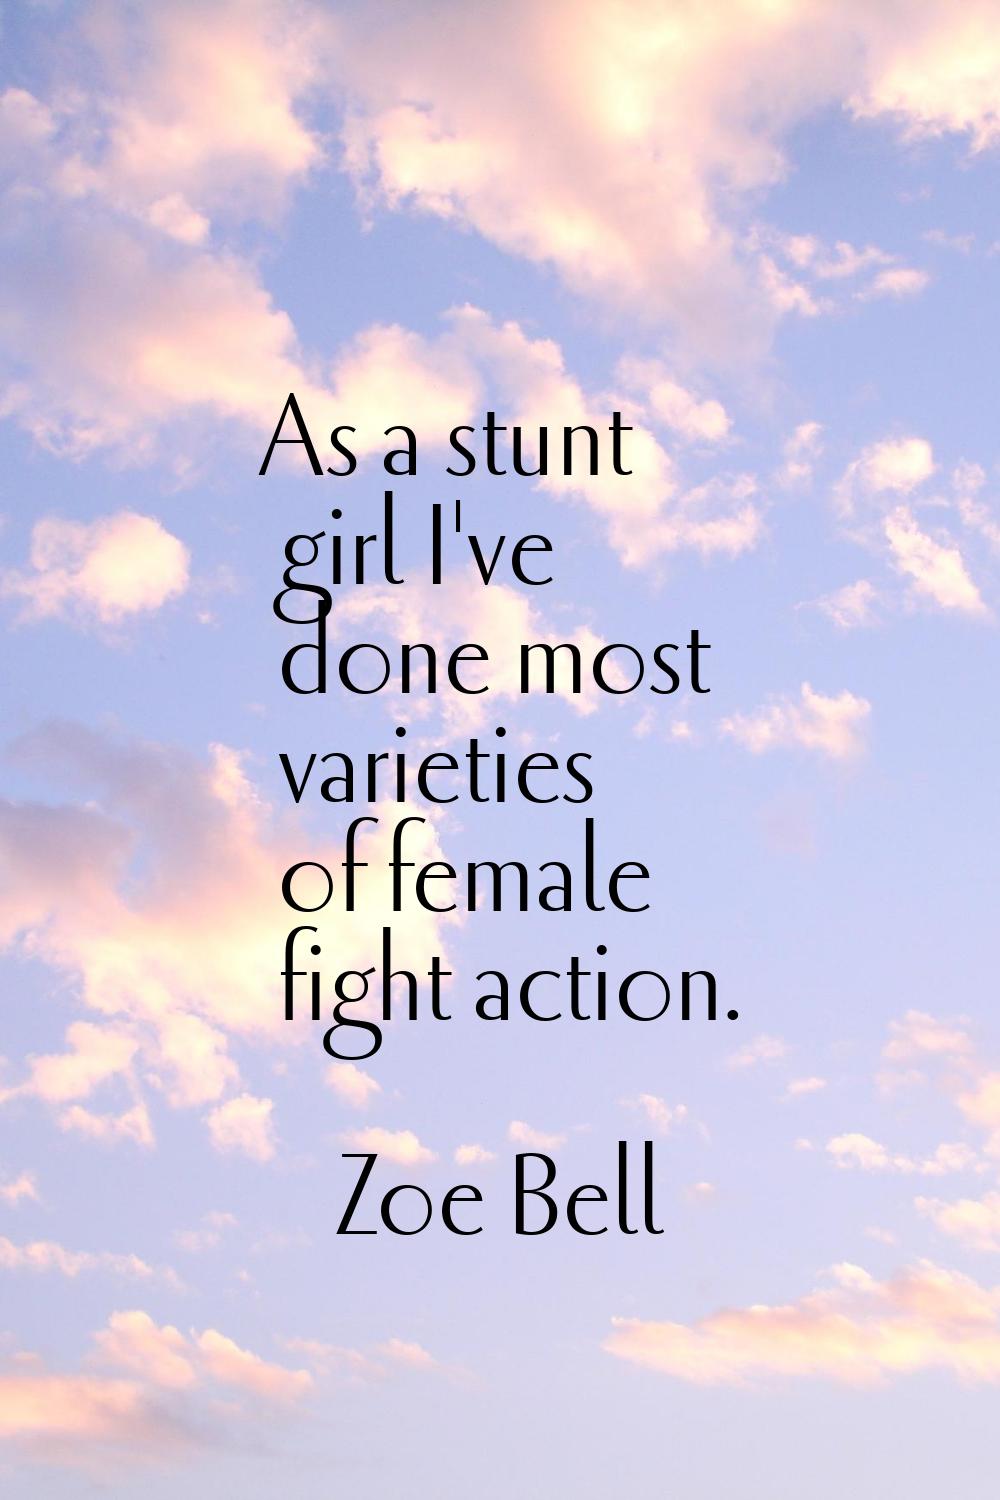 As a stunt girl I've done most varieties of female fight action.